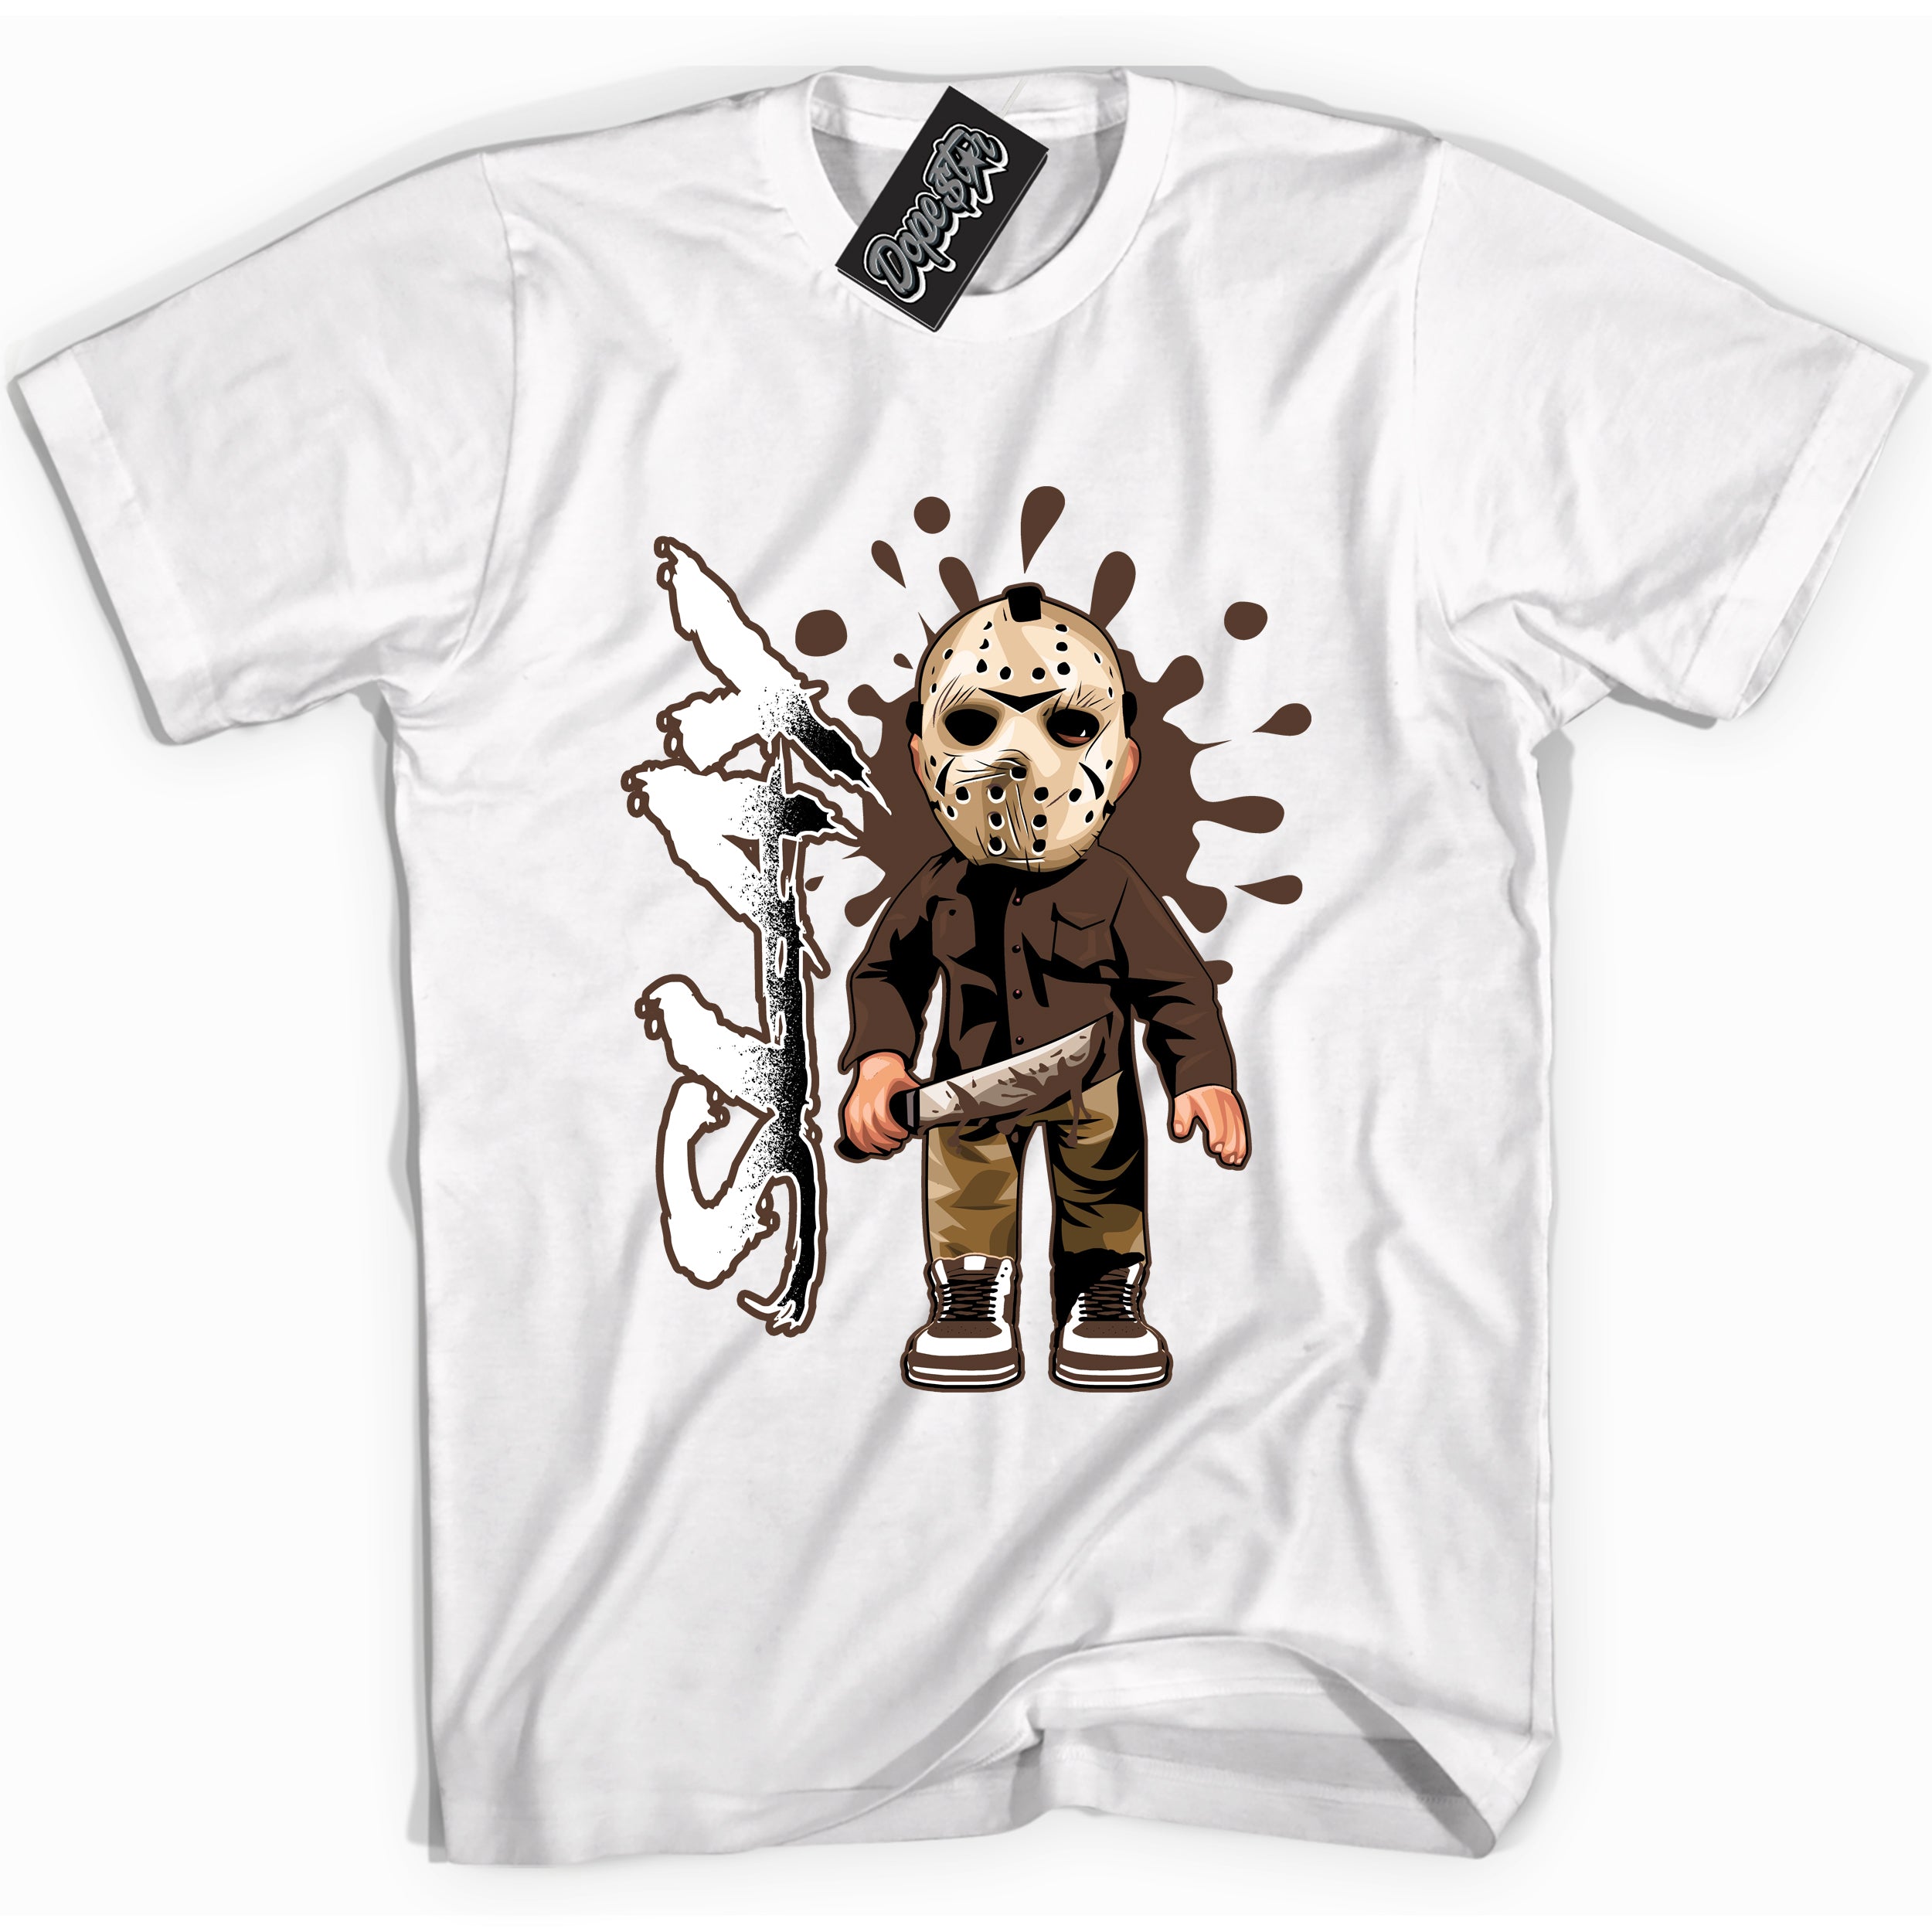 Cool White graphic tee with “ Slay ” design, that perfectly matches Palomino 1s sneakers 